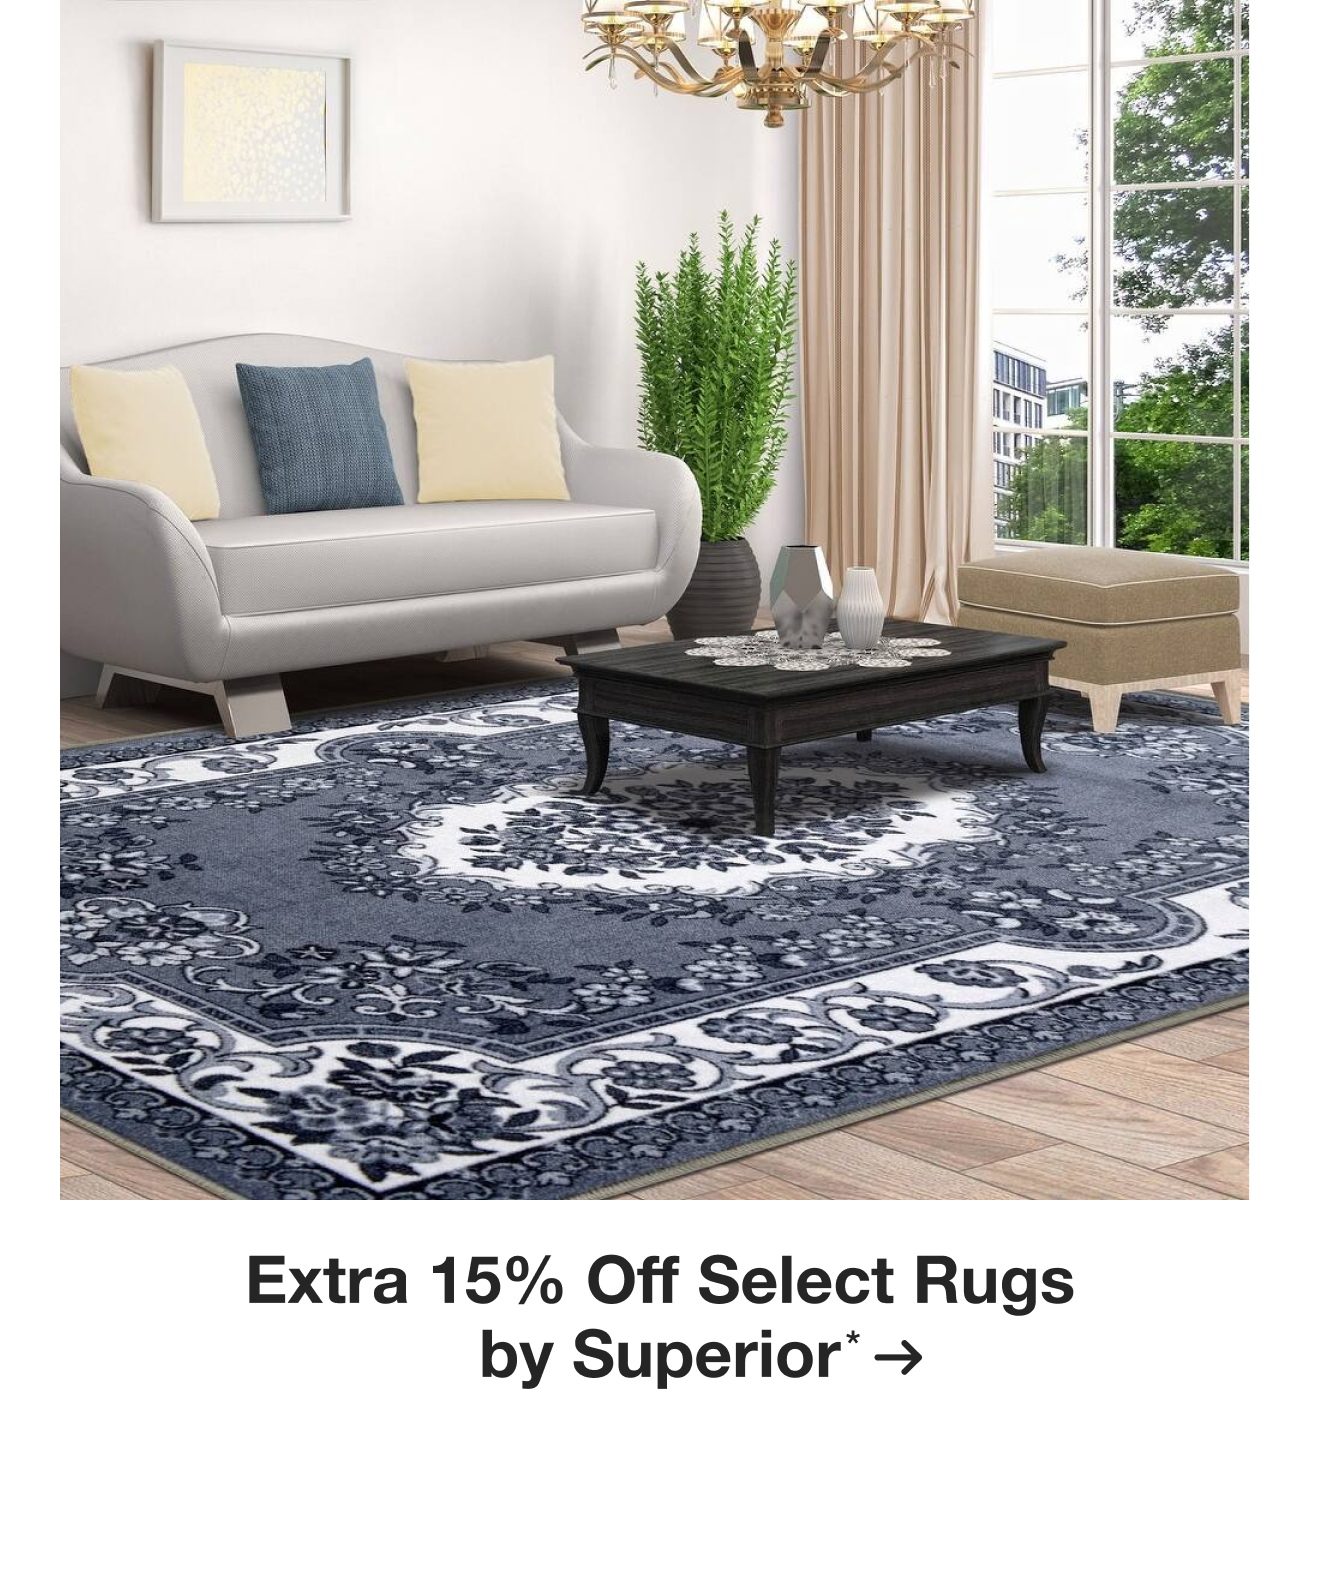 Extra 15% Off select rugs by Superior*